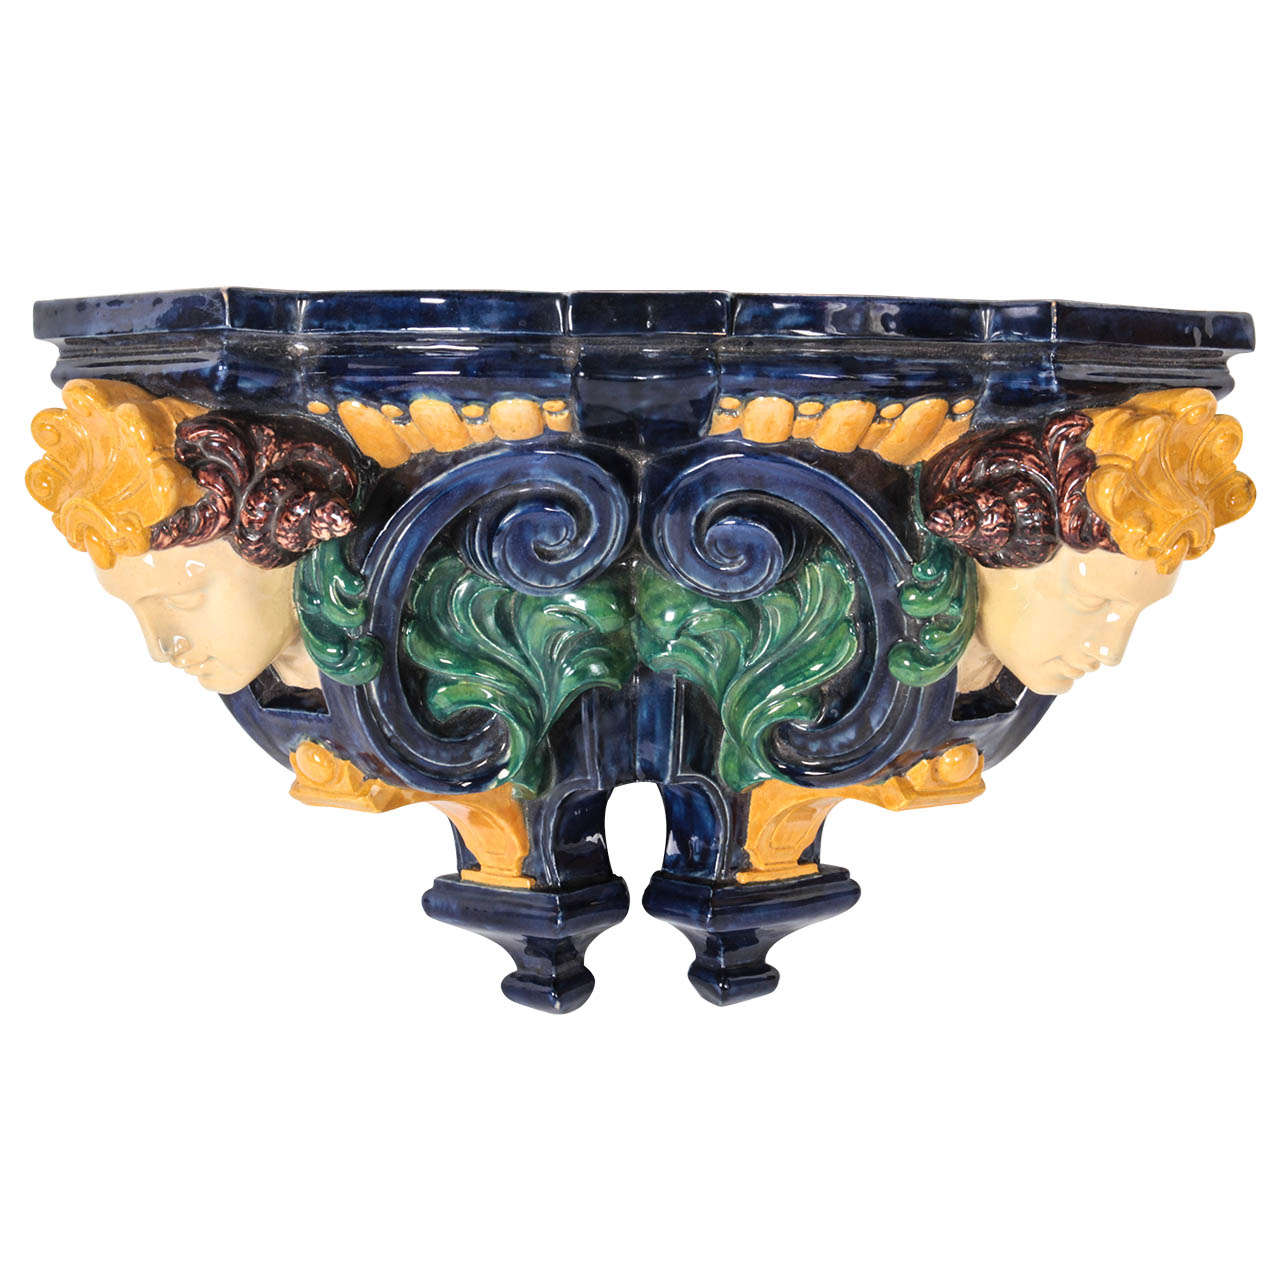 Eugene Schopin French Renaissance Revival Style Majolica Wall Shelf, circa 1872 For Sale